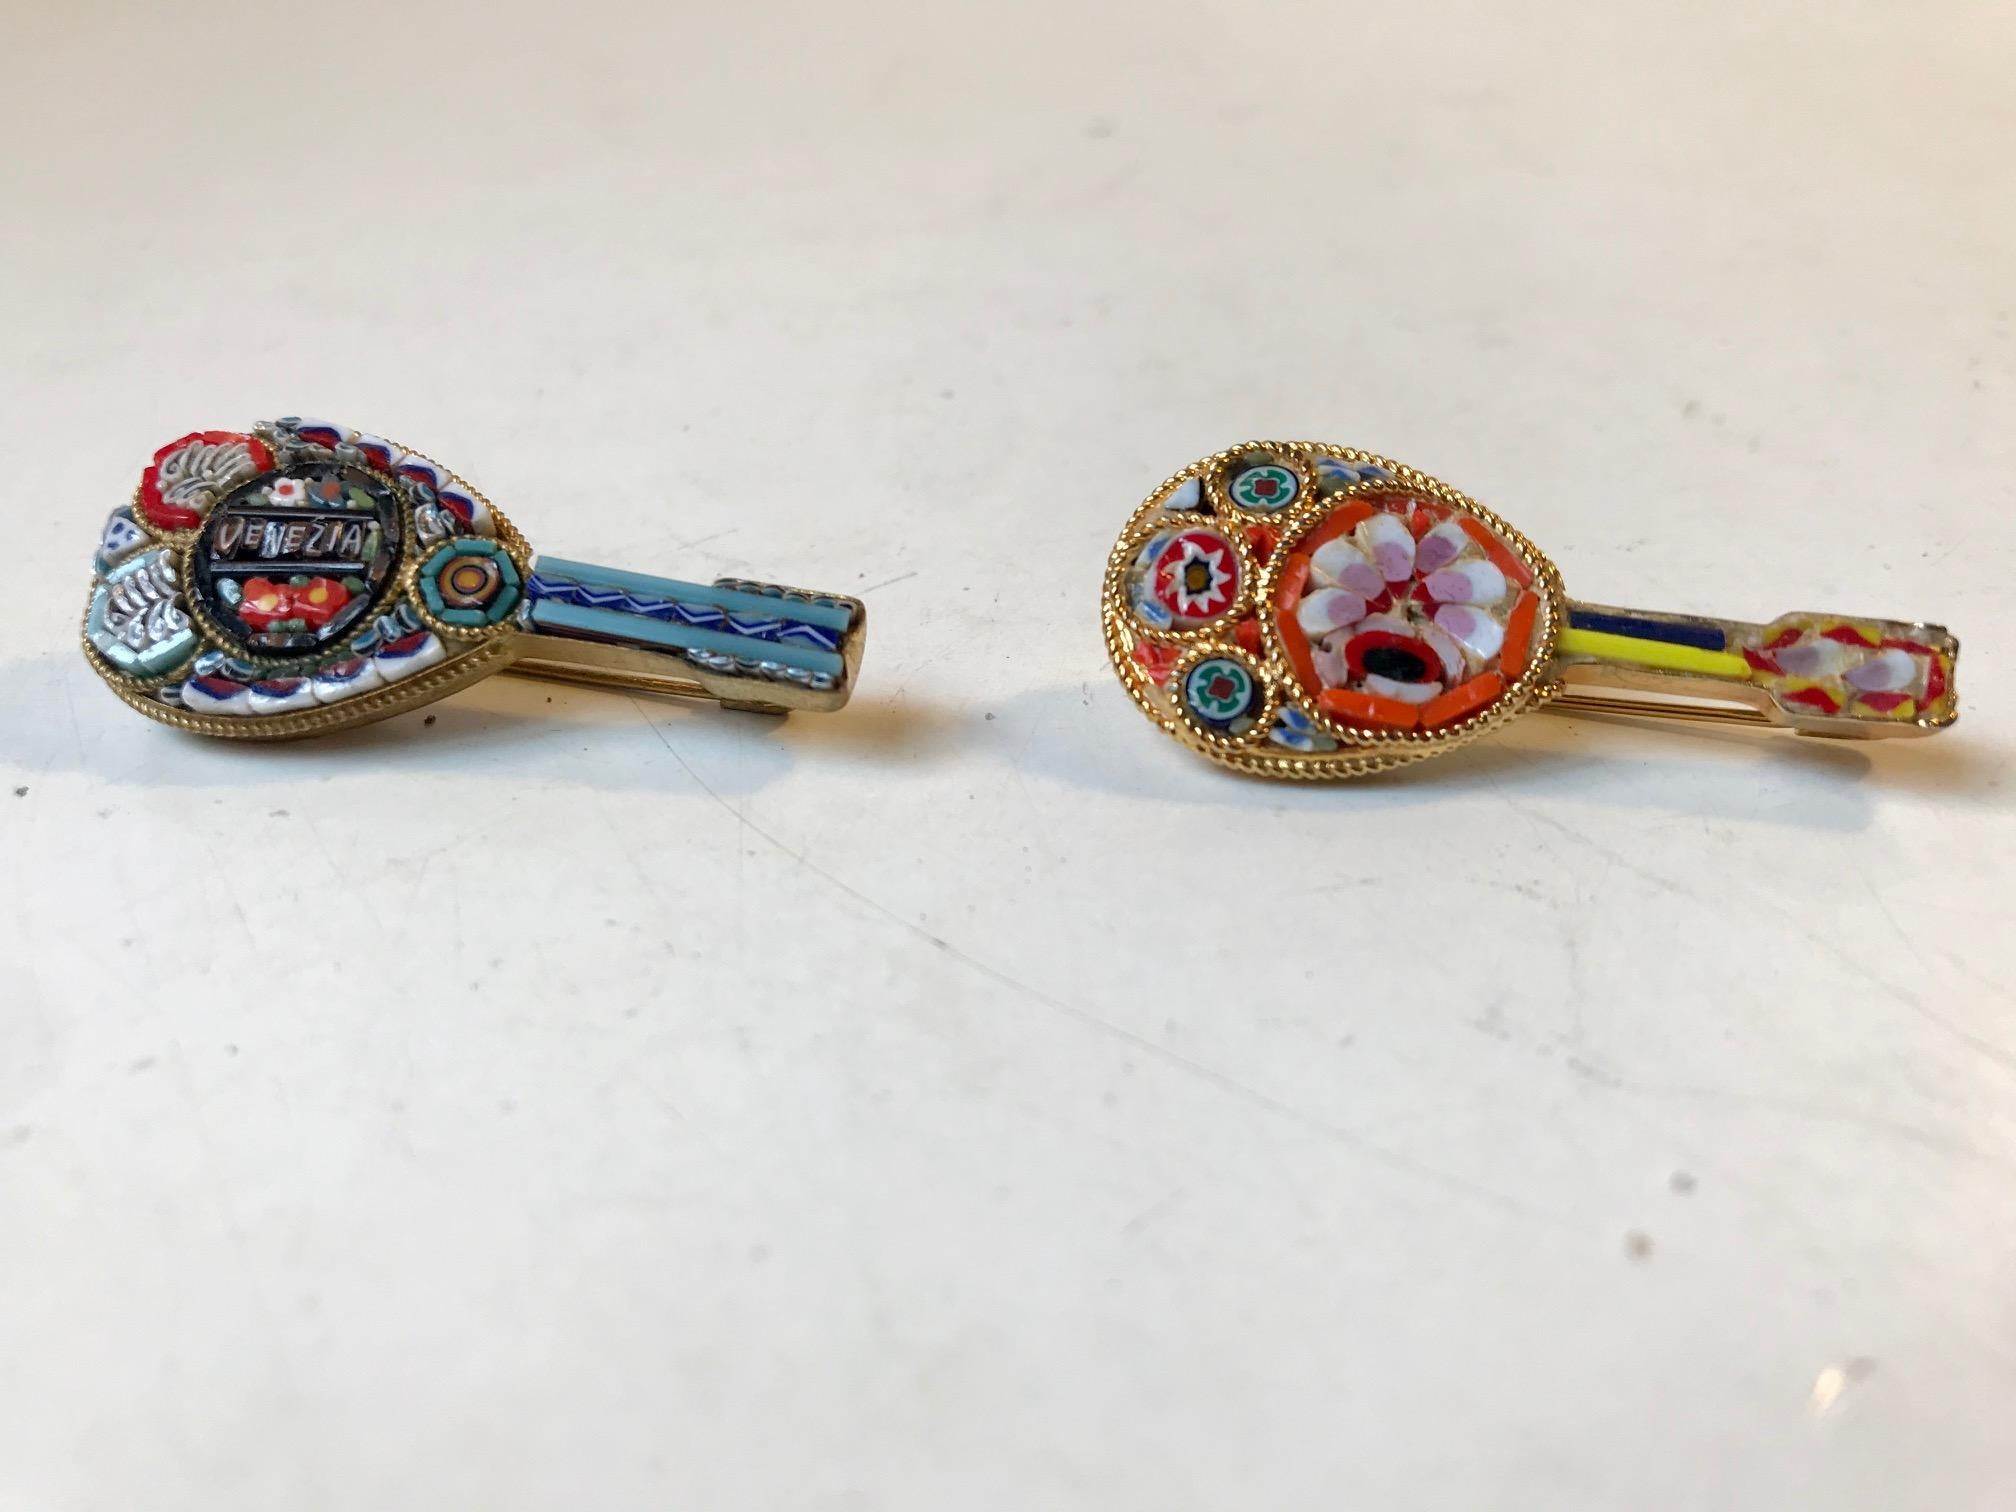 A set of lute/guitar brooches made in Venice Italy during the 1960s or 1970s. The micro mosaic consists of tiny pieces of colored glass. Set into gilt brass frames in the shape of lutes/guitars. The price is for both.